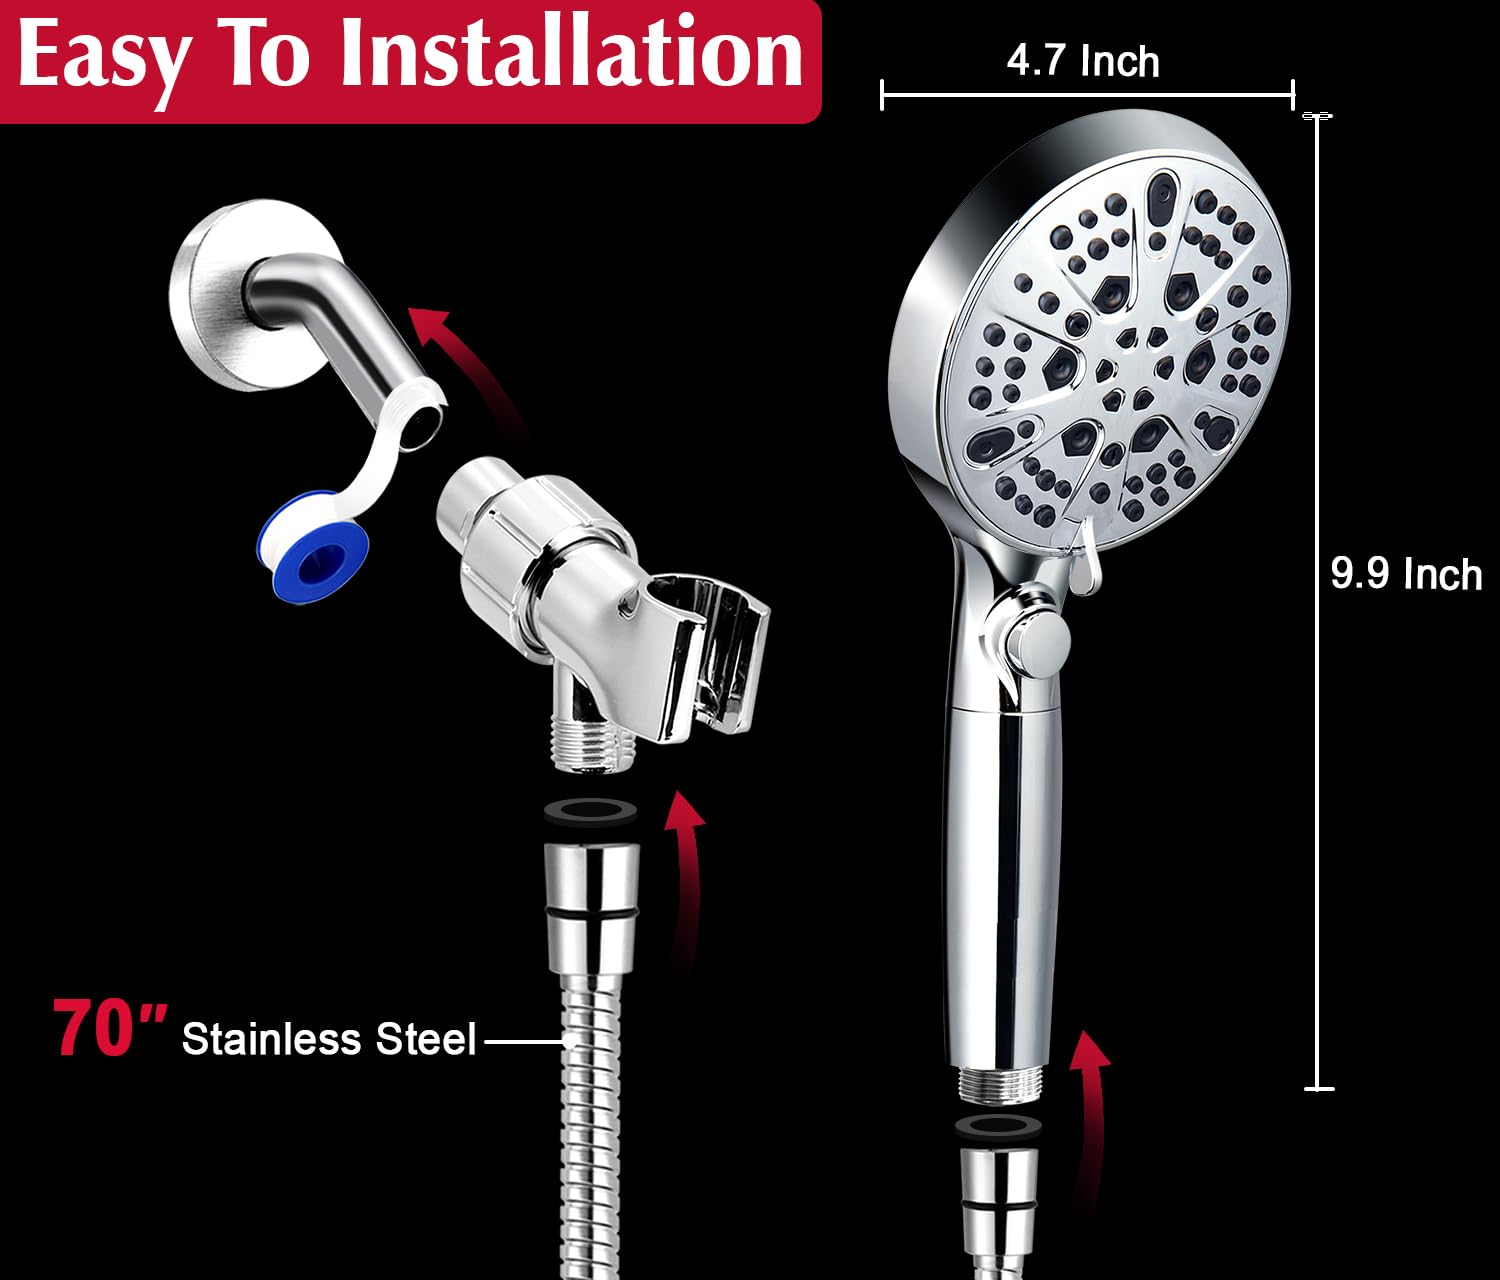 Filtered Shower Head with Handheld,High Pressure Water Flow and 10-Mode Shower Head Filter for Hard Water,Water Softener Shower Head,Handheld Shower Head with 70“ Long Hose